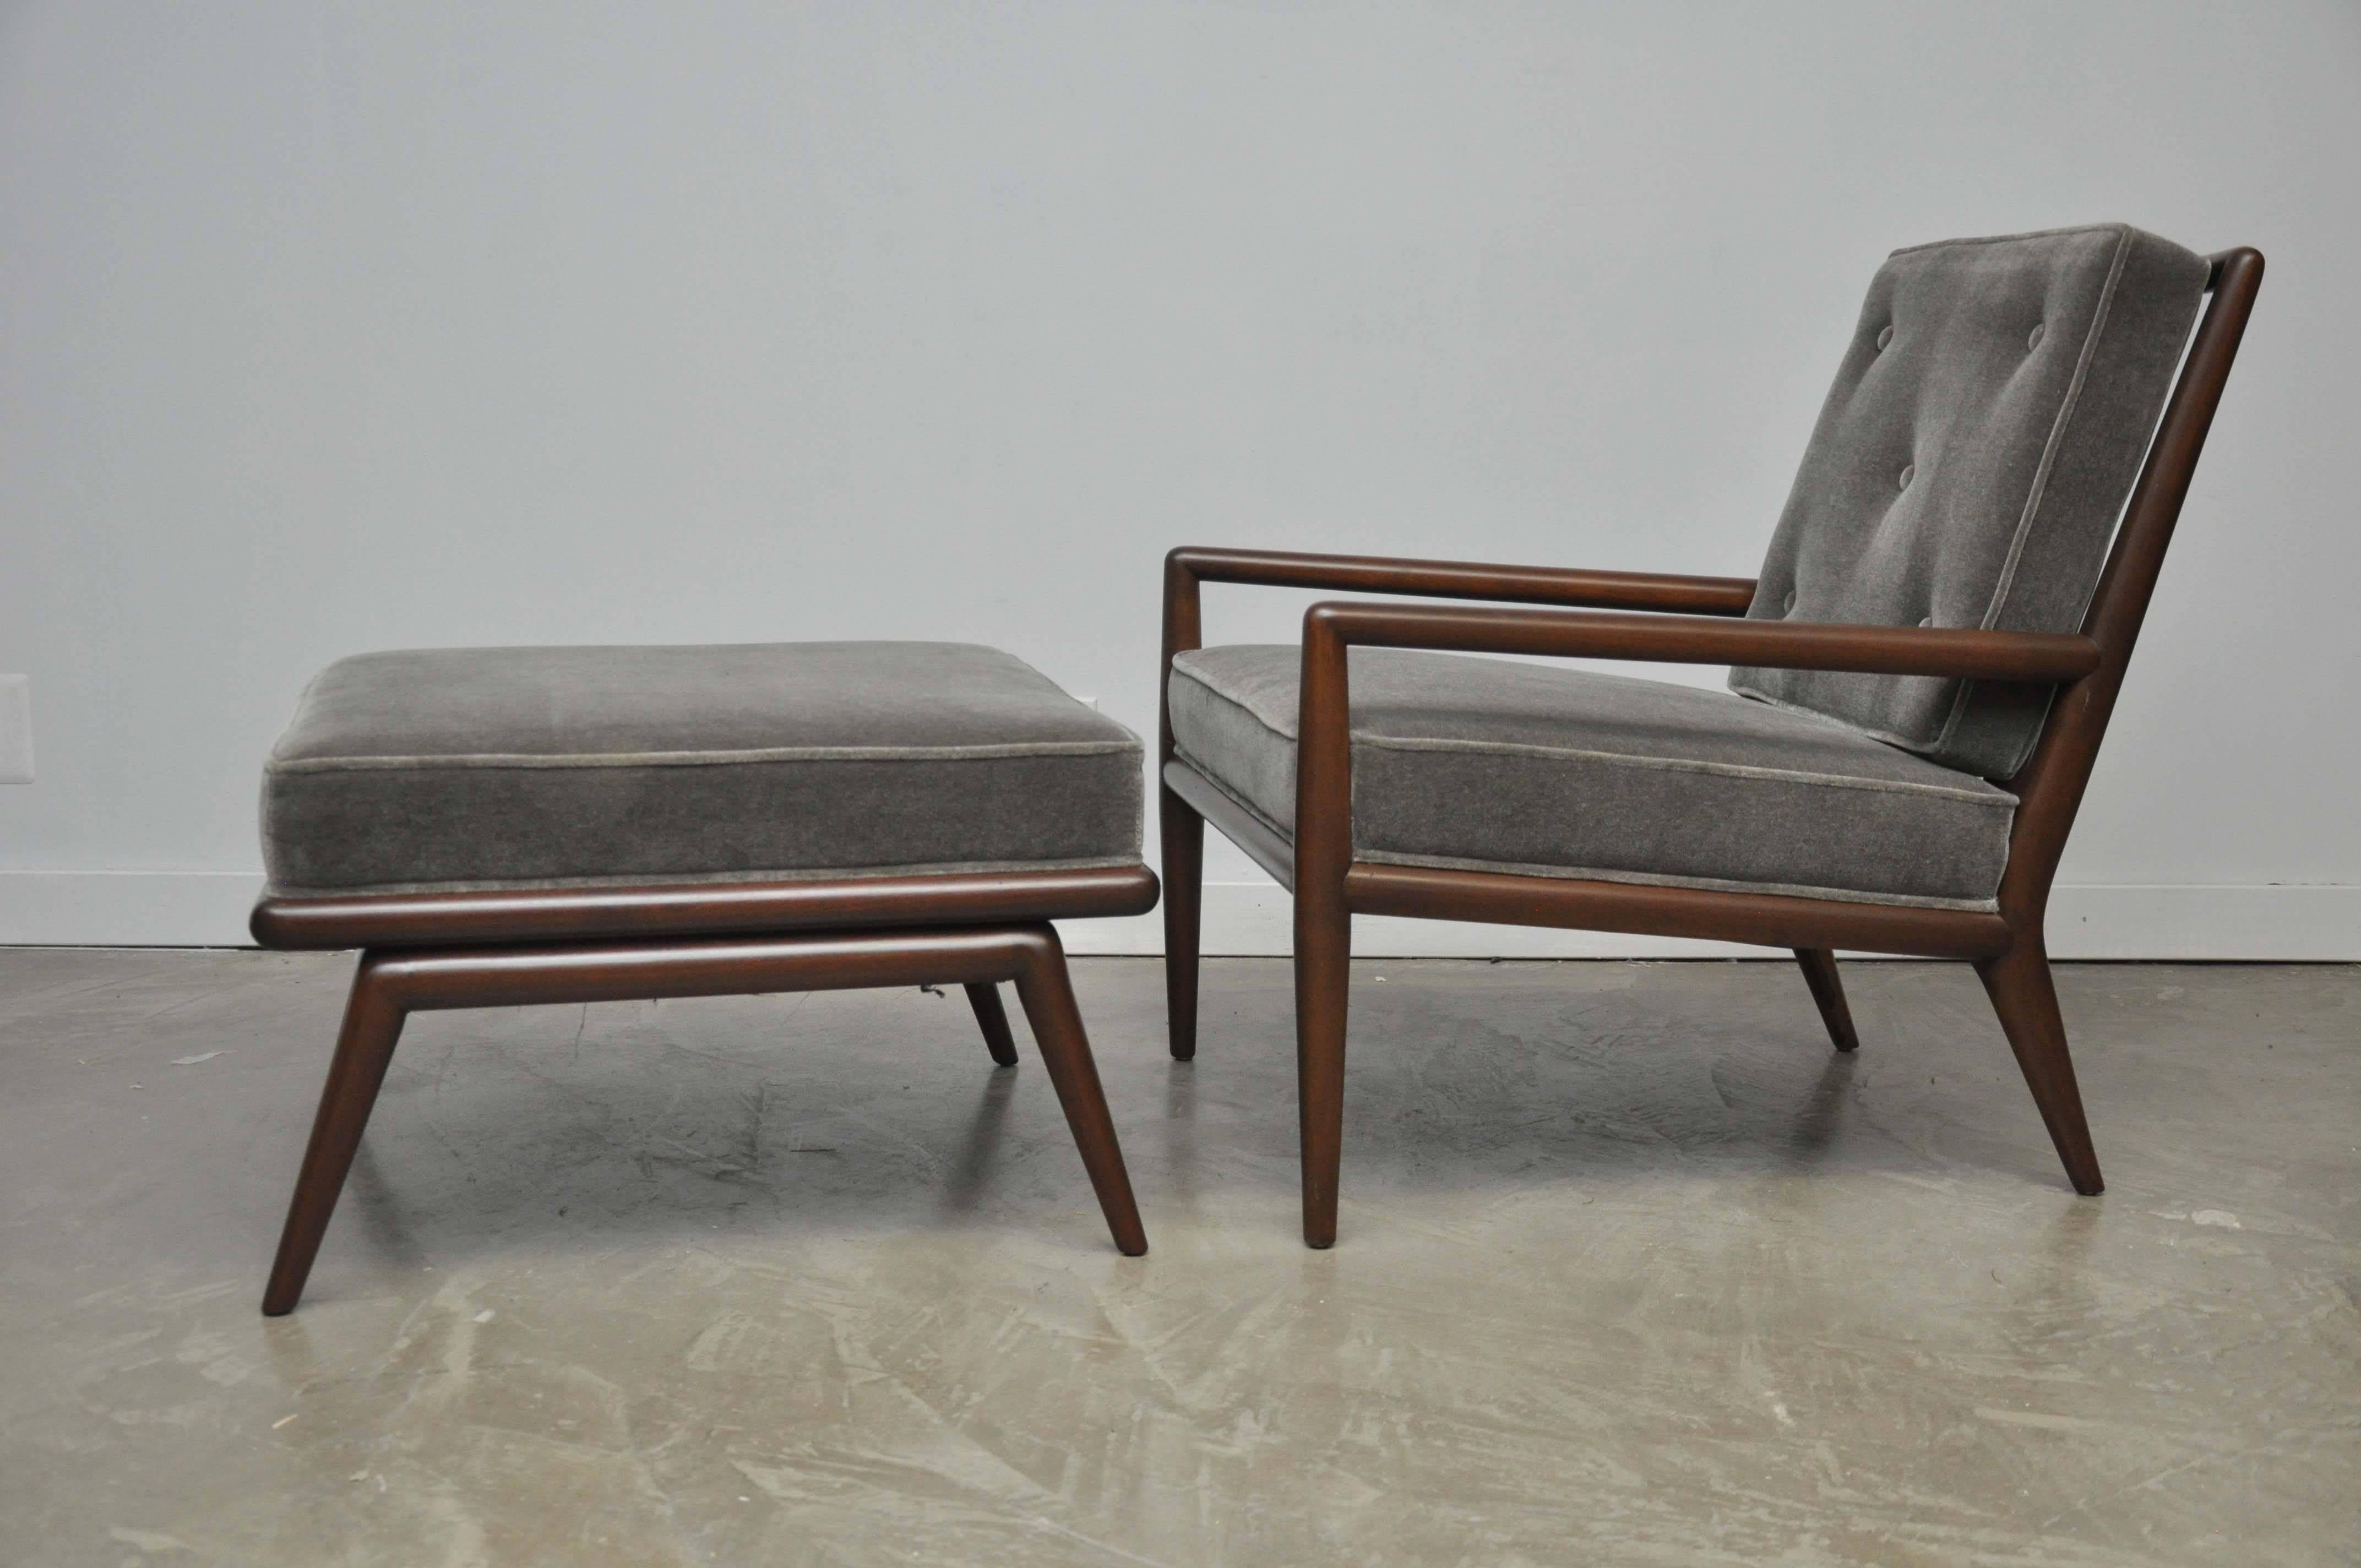 Pair of lounge chairs with ottomans. Designed by T.H. Robsjohn-Gibbings, circa 1950s. Fully restored. Refinished frames with new mohair upholstery.

Chairs 28 wide, 32 deep, 21 tall, 17 seat.
Ottomans 26 x 26, 16 tall.